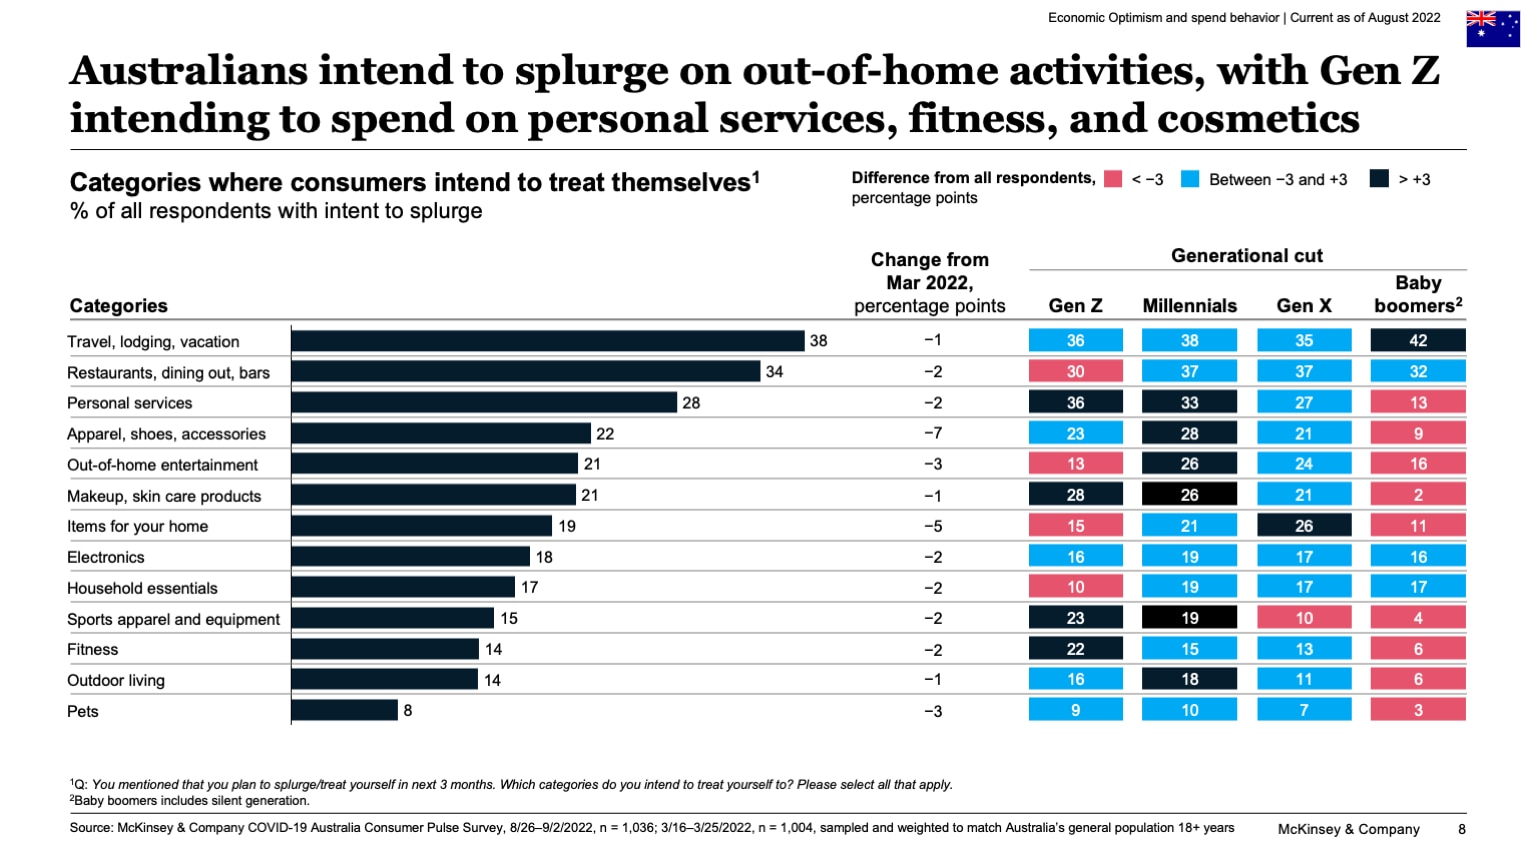 Australians intend to splurge on out-of-home activities, with Gen Z intending to spend on personal services, fitness, and cosmetics